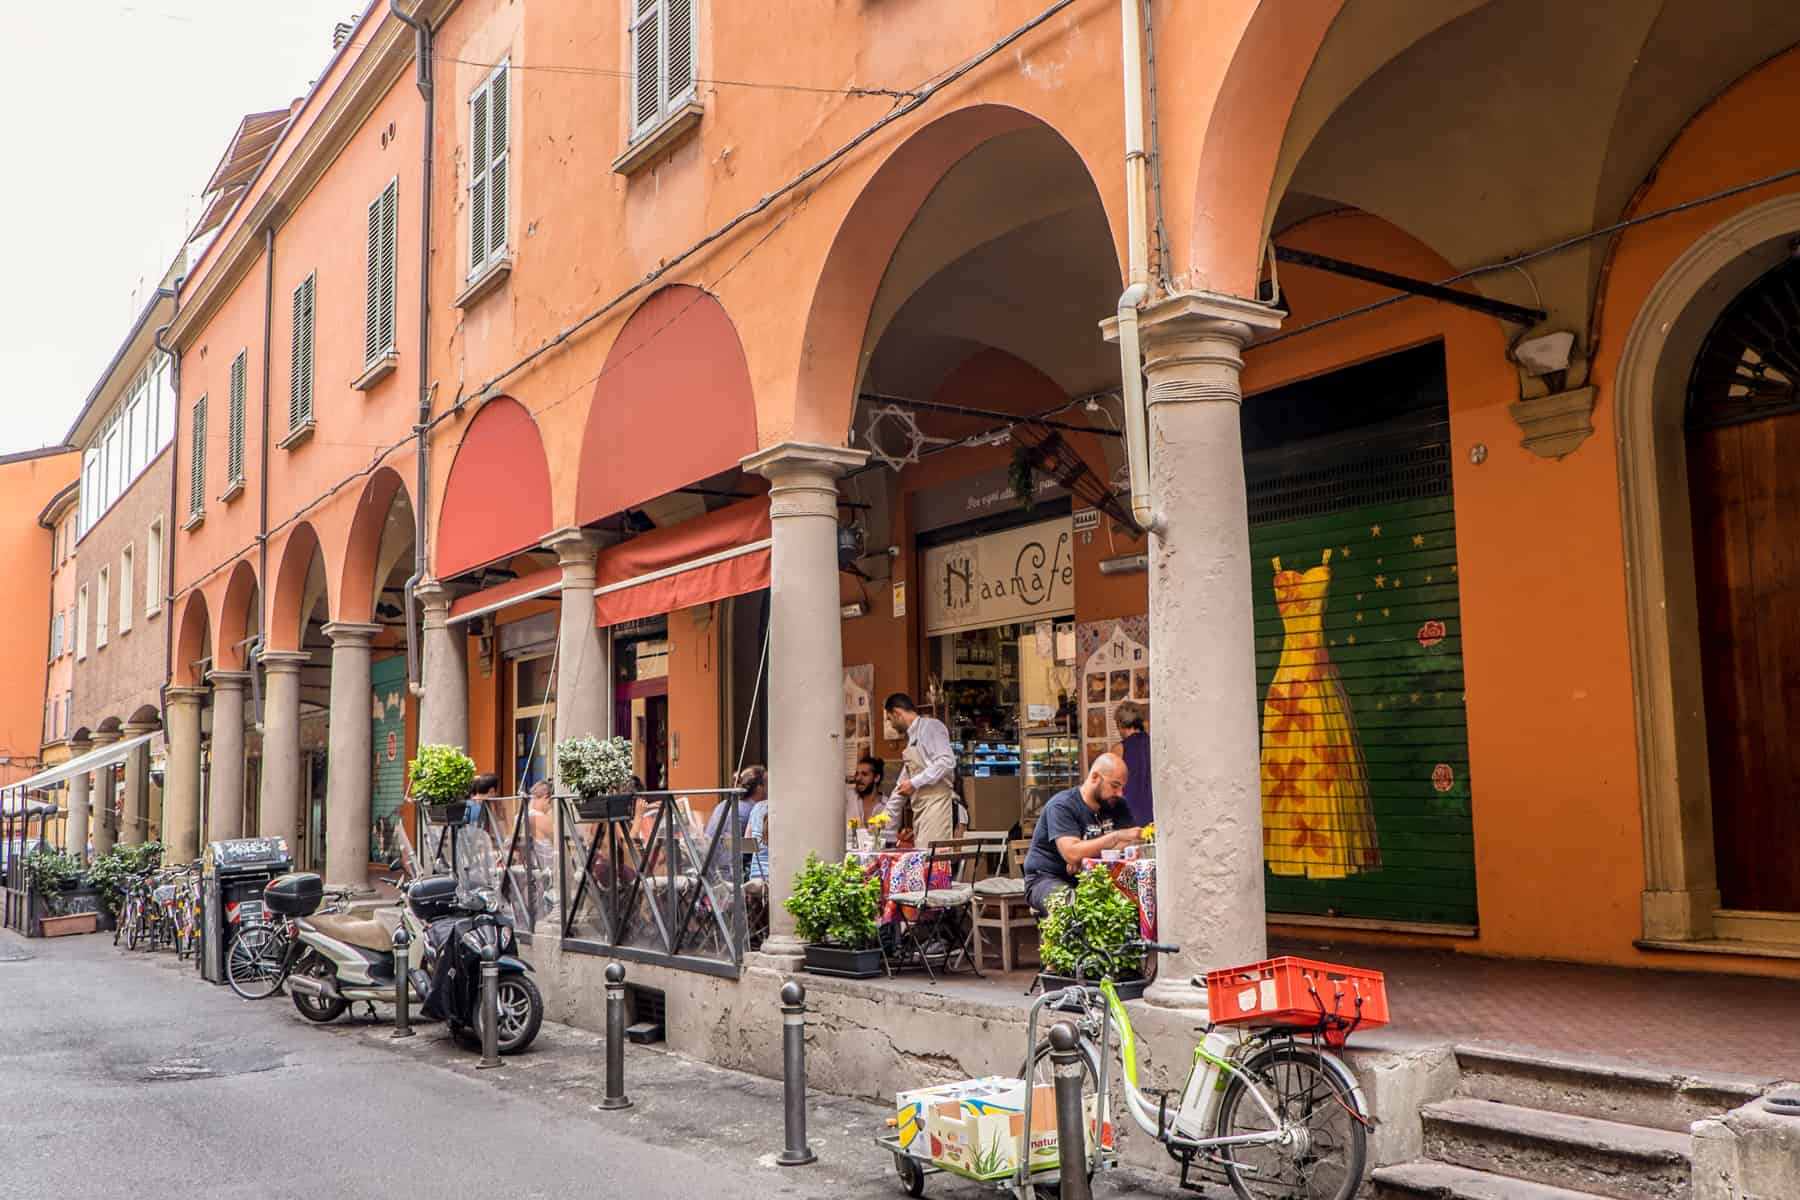 People sit outside a cafe, set within the archway corridor of a long, orange building in Bologna, Italia.